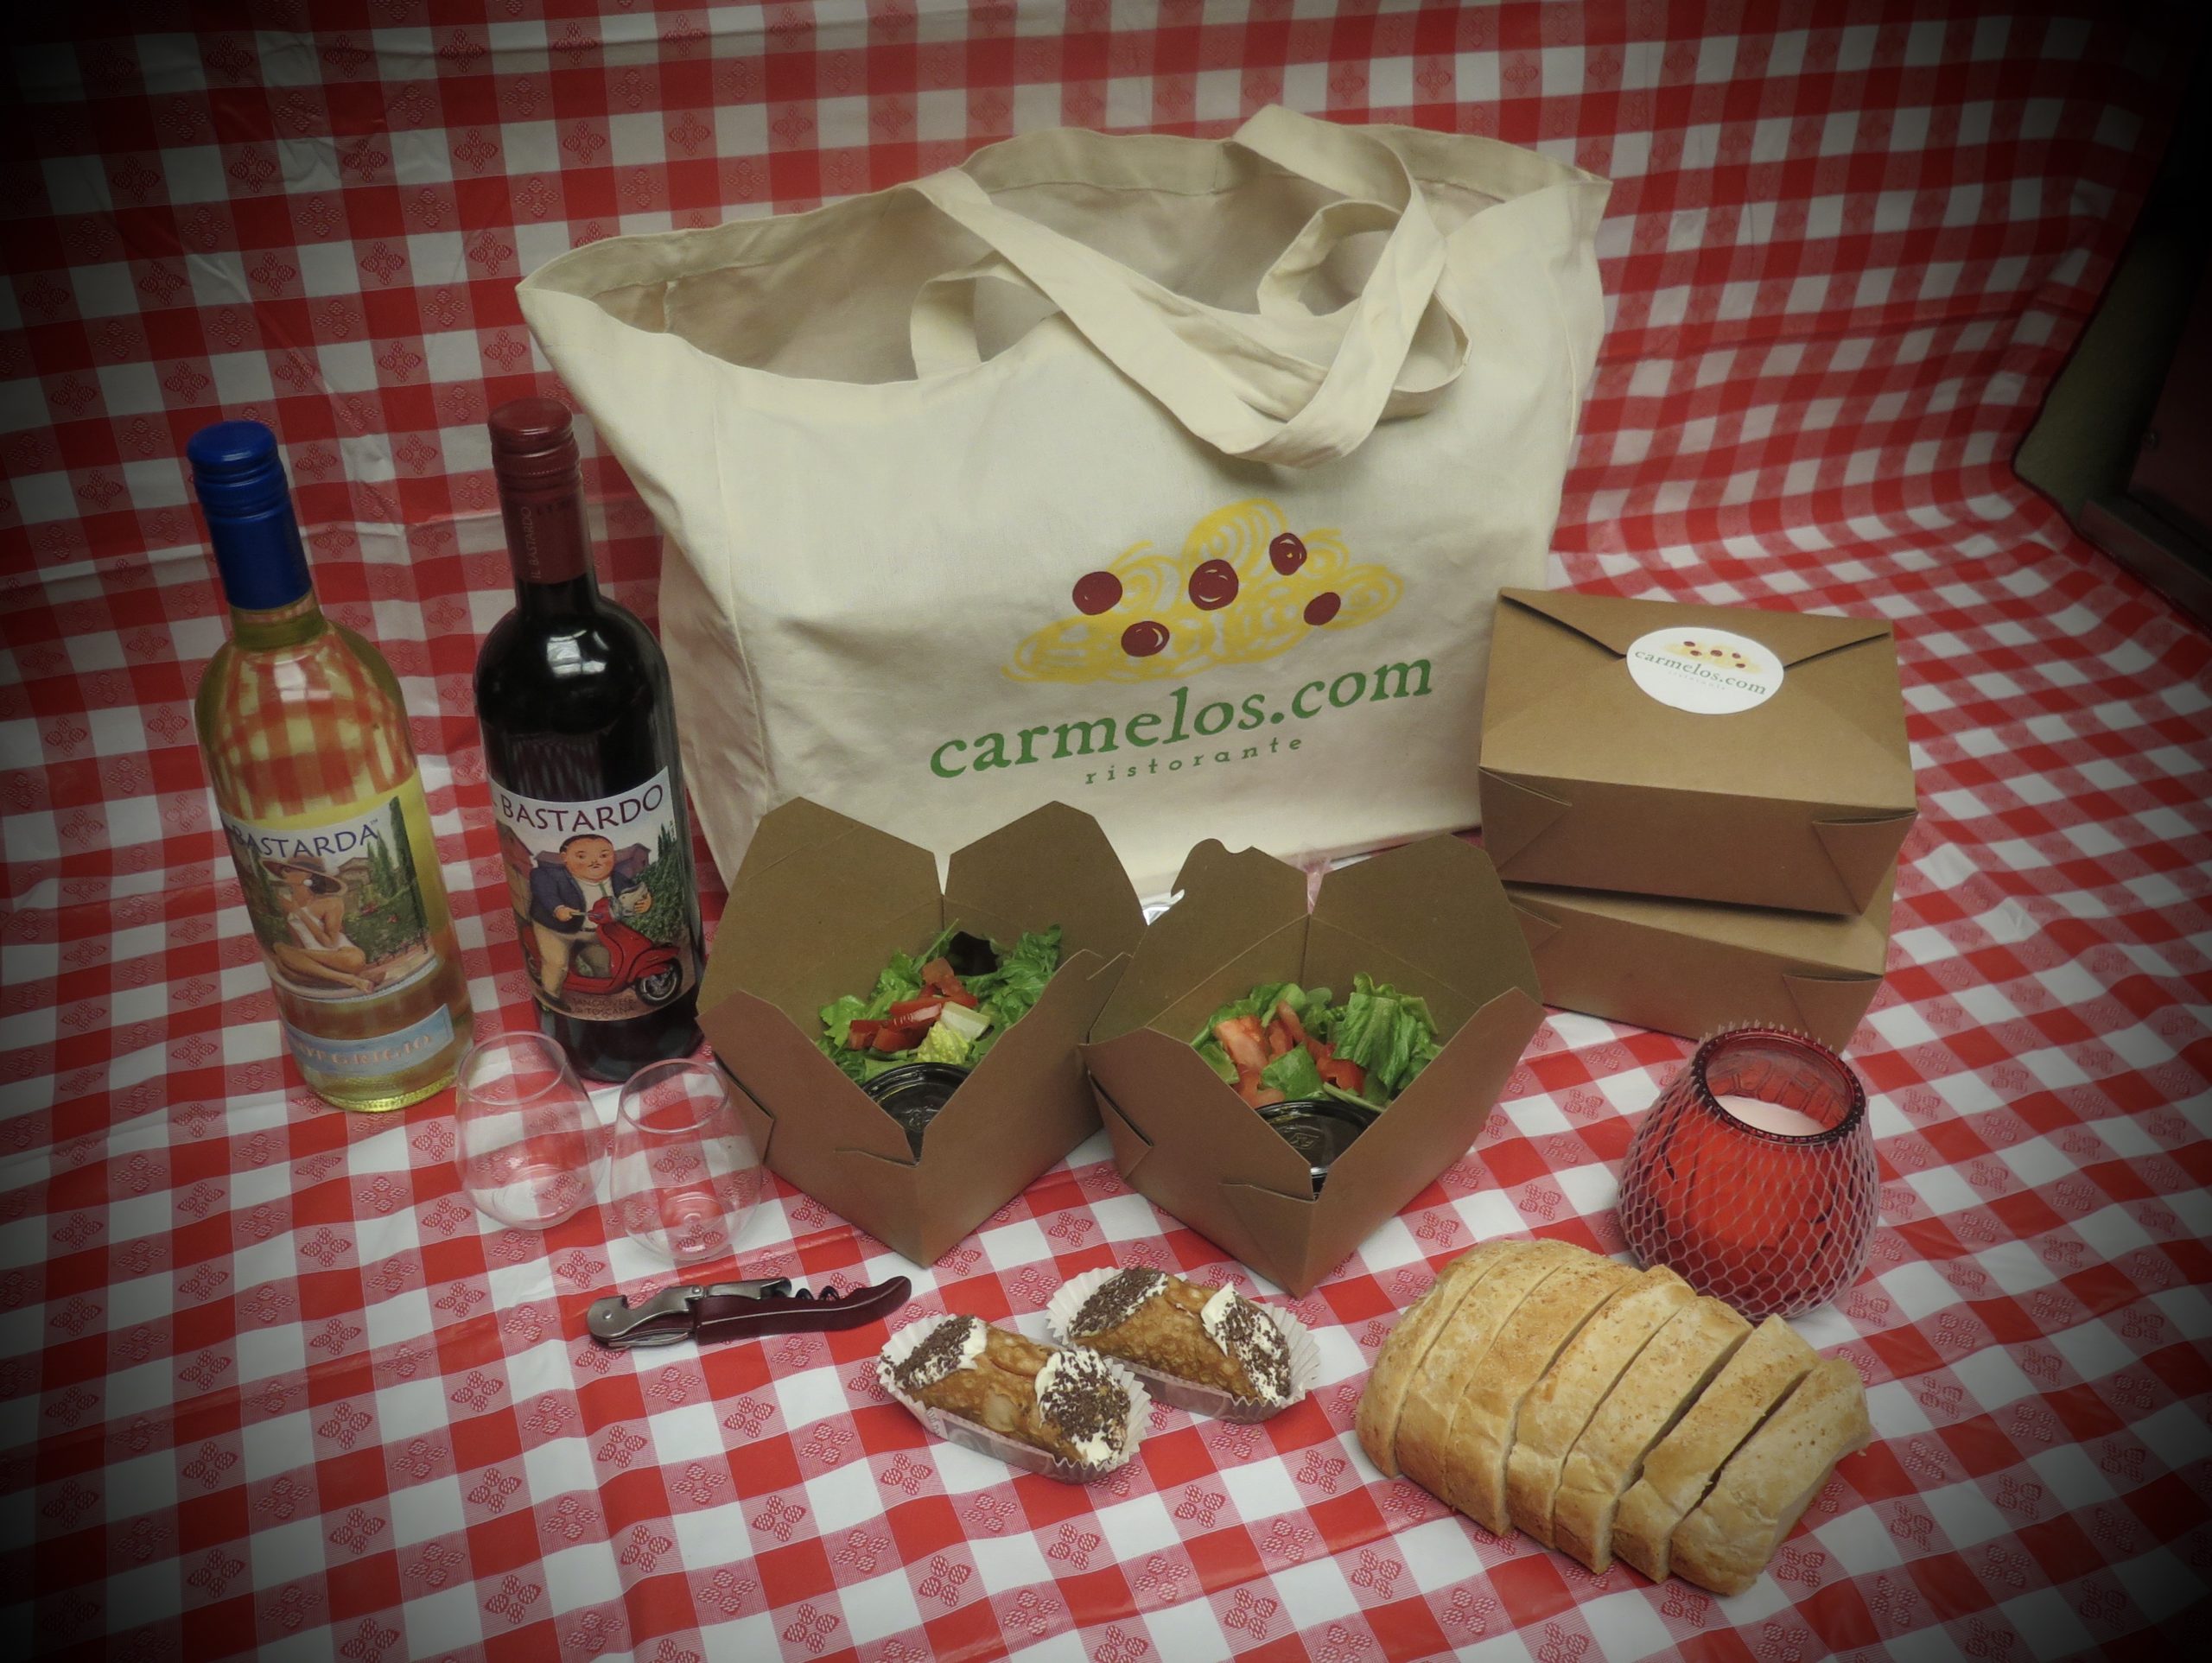 Picnic kit with packed food, wine bottle, and canvas carrying bag